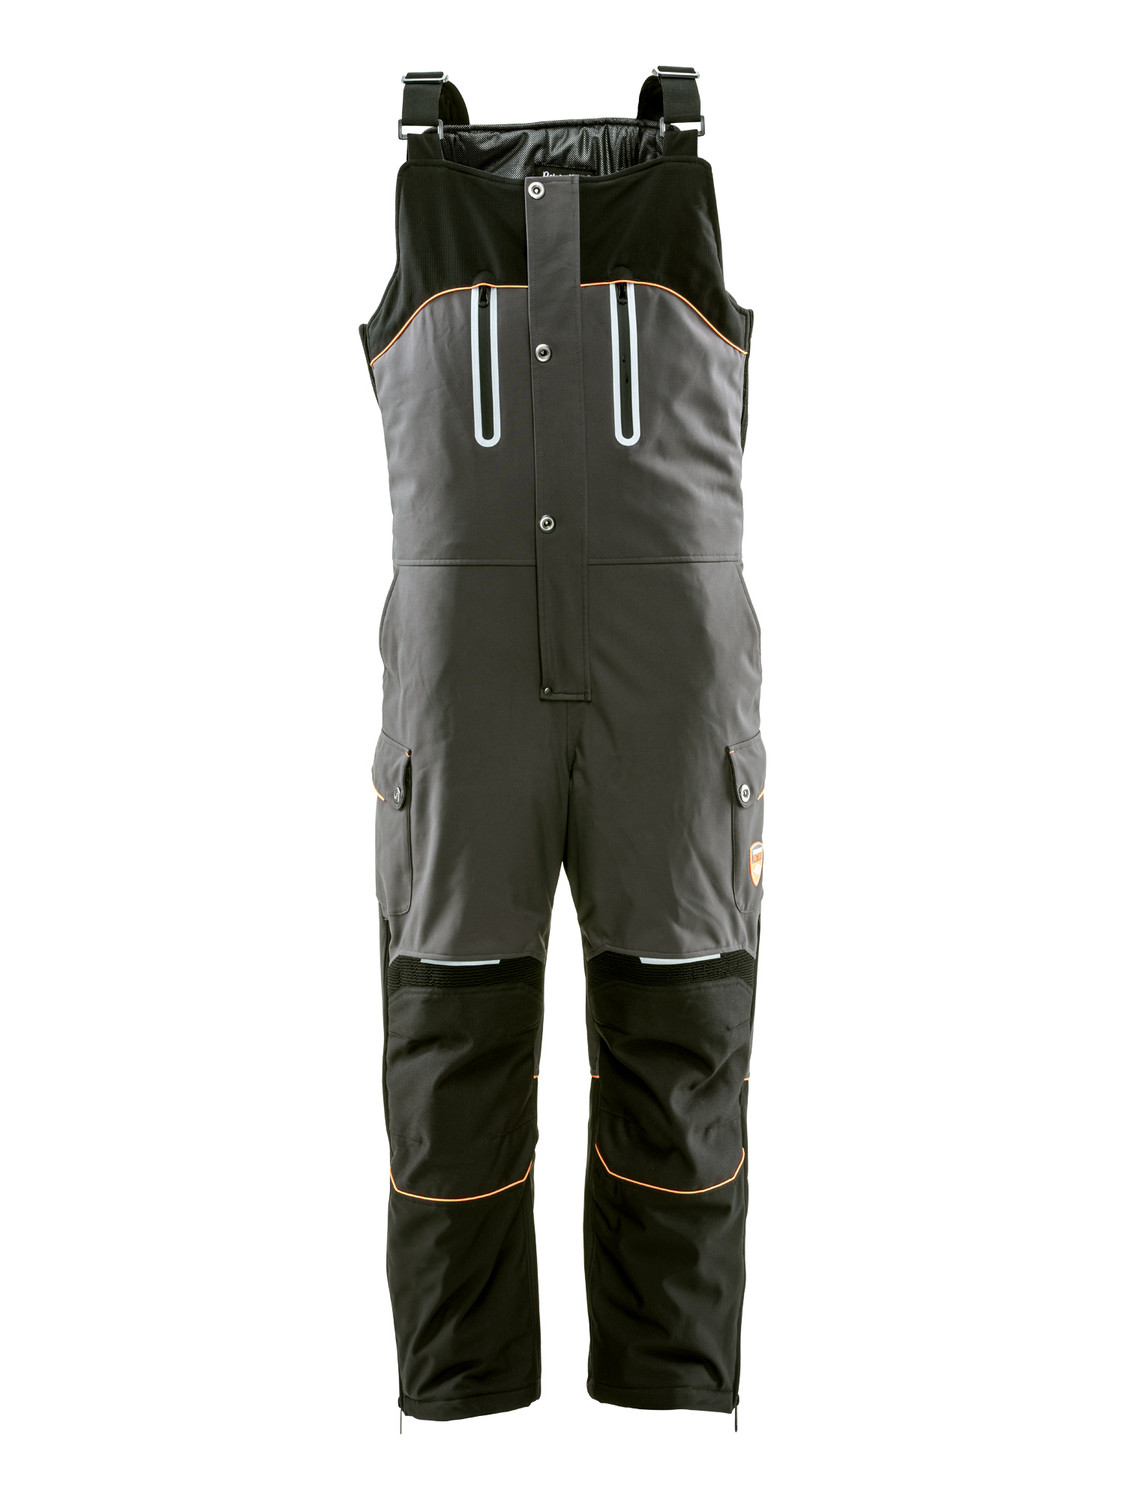 WHY DO YOU NEED COLD WEATHER BIB OVERALLS? - RefrigiWear